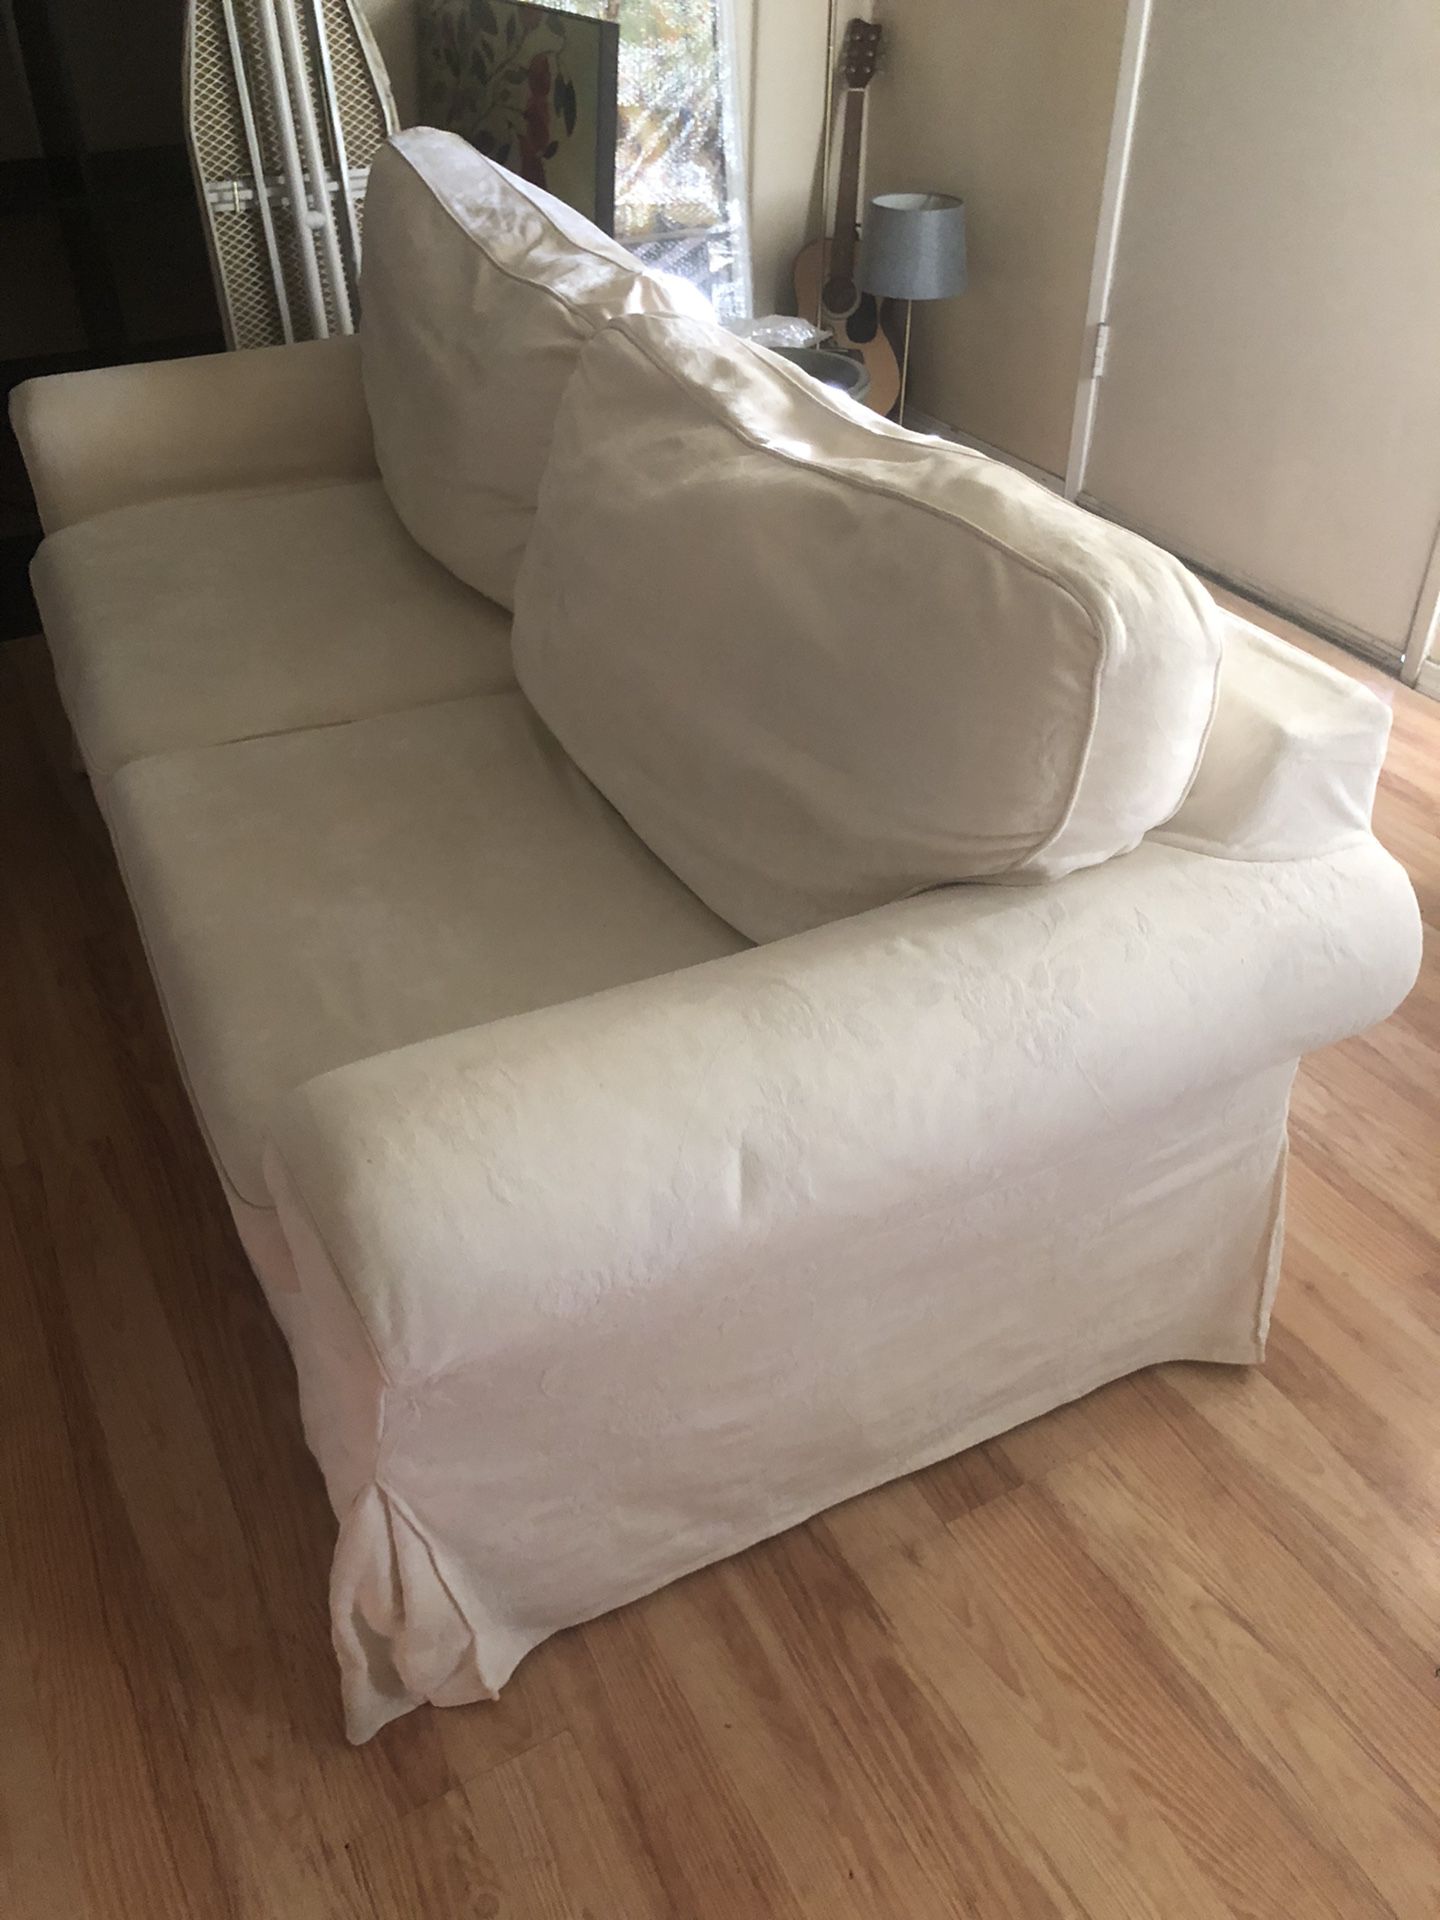 Apartment Furniture Sale- Everything Must Go! 